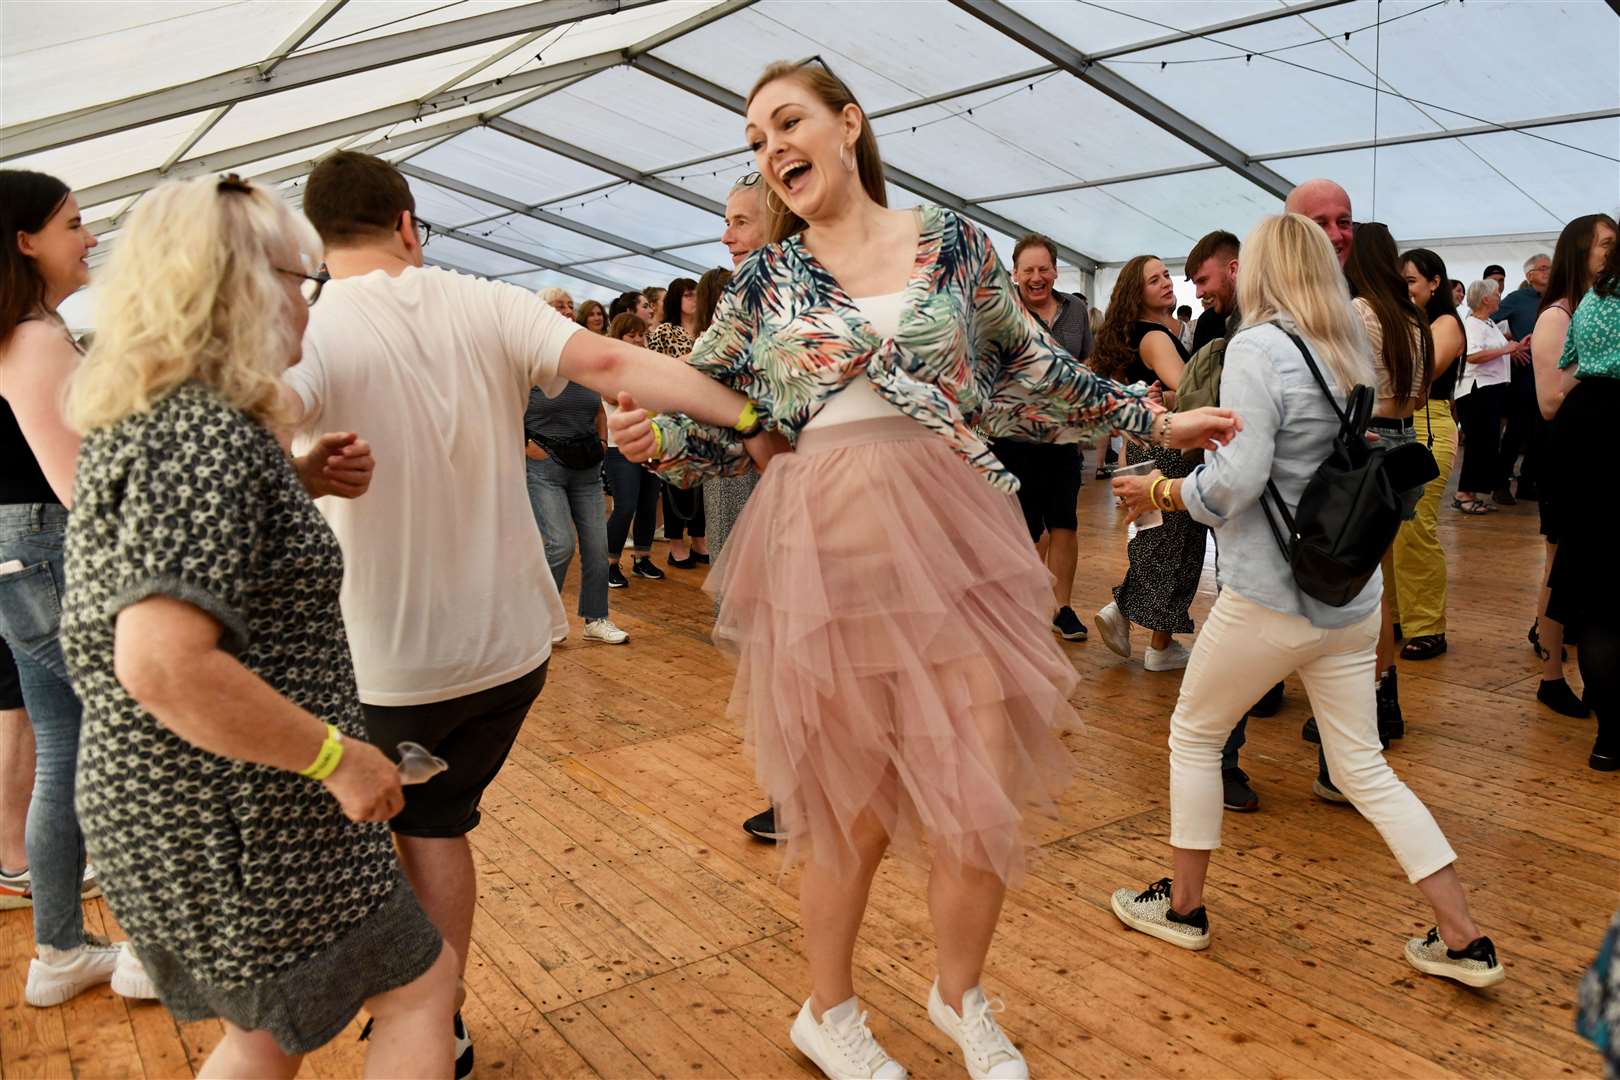 Music fans filling the dance floor at Tunes By the Dunes 2023. © John Wright Studio